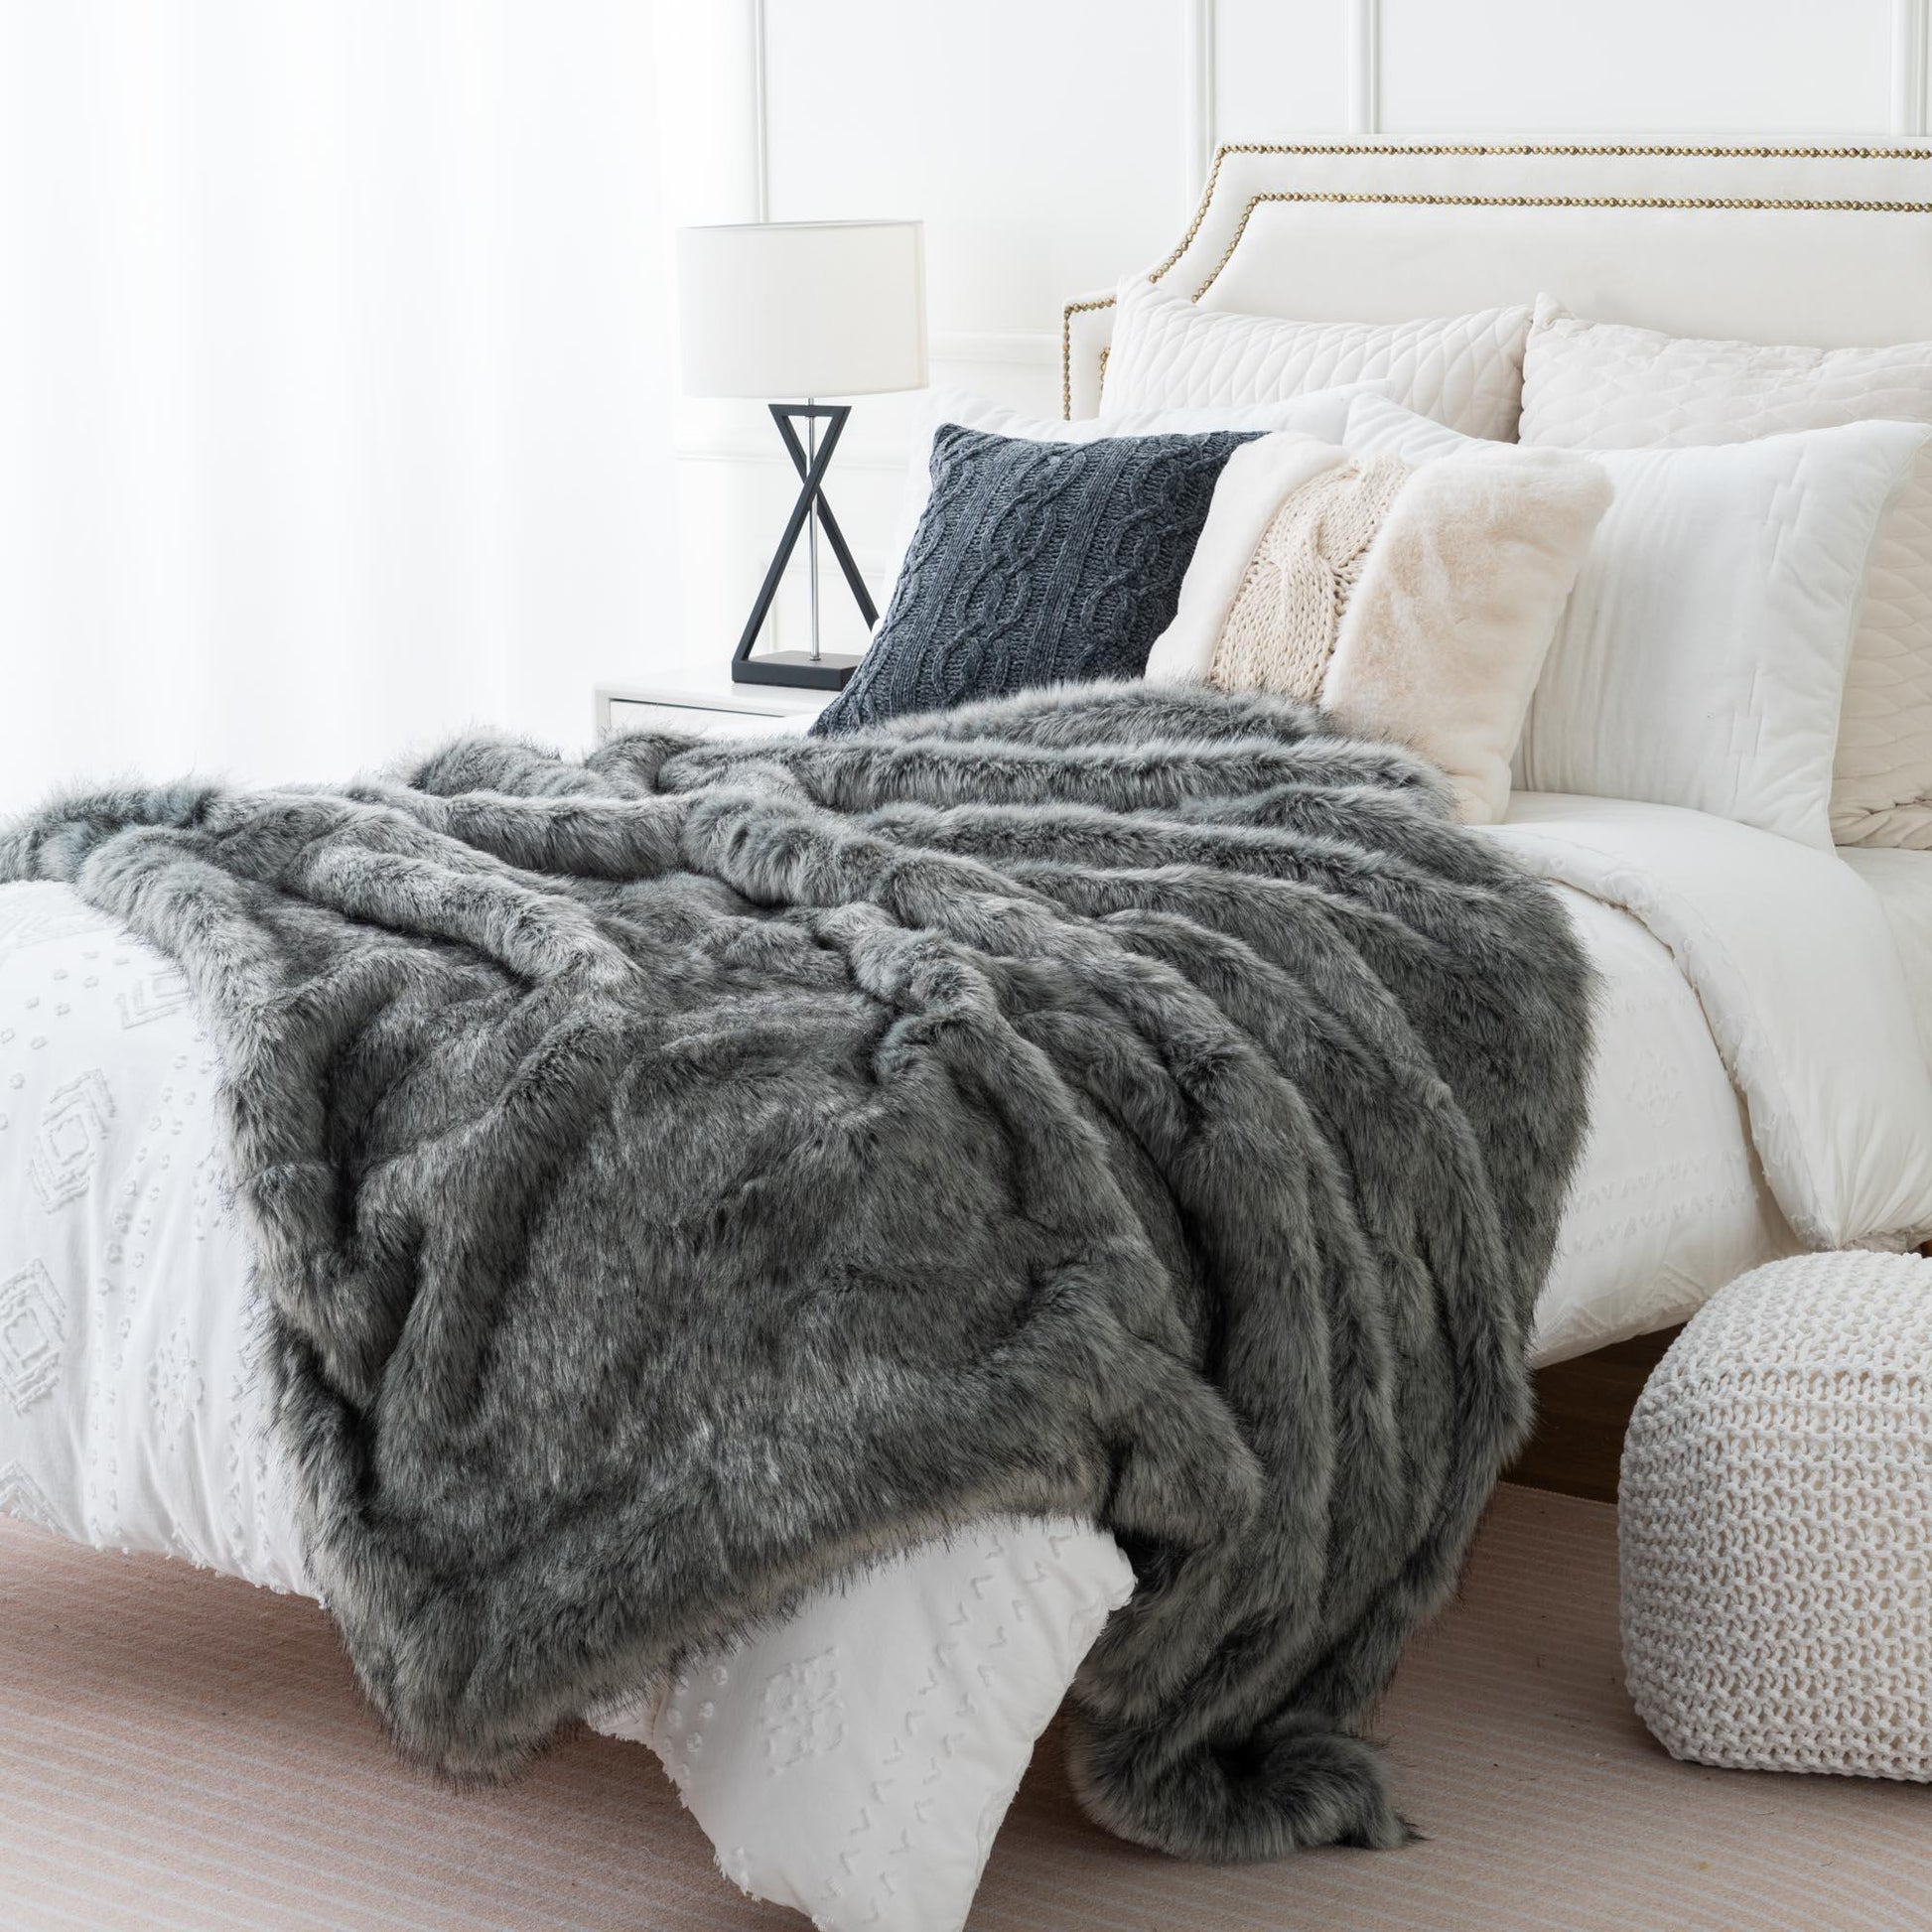 BATTILO HOME Luxury White Faux Fur Throw Blanket Long Pile with Black Tips,  51x67, Super Warm Thick Faux Fur Blanket for Couch, Bed, Fuzzy Fluffy